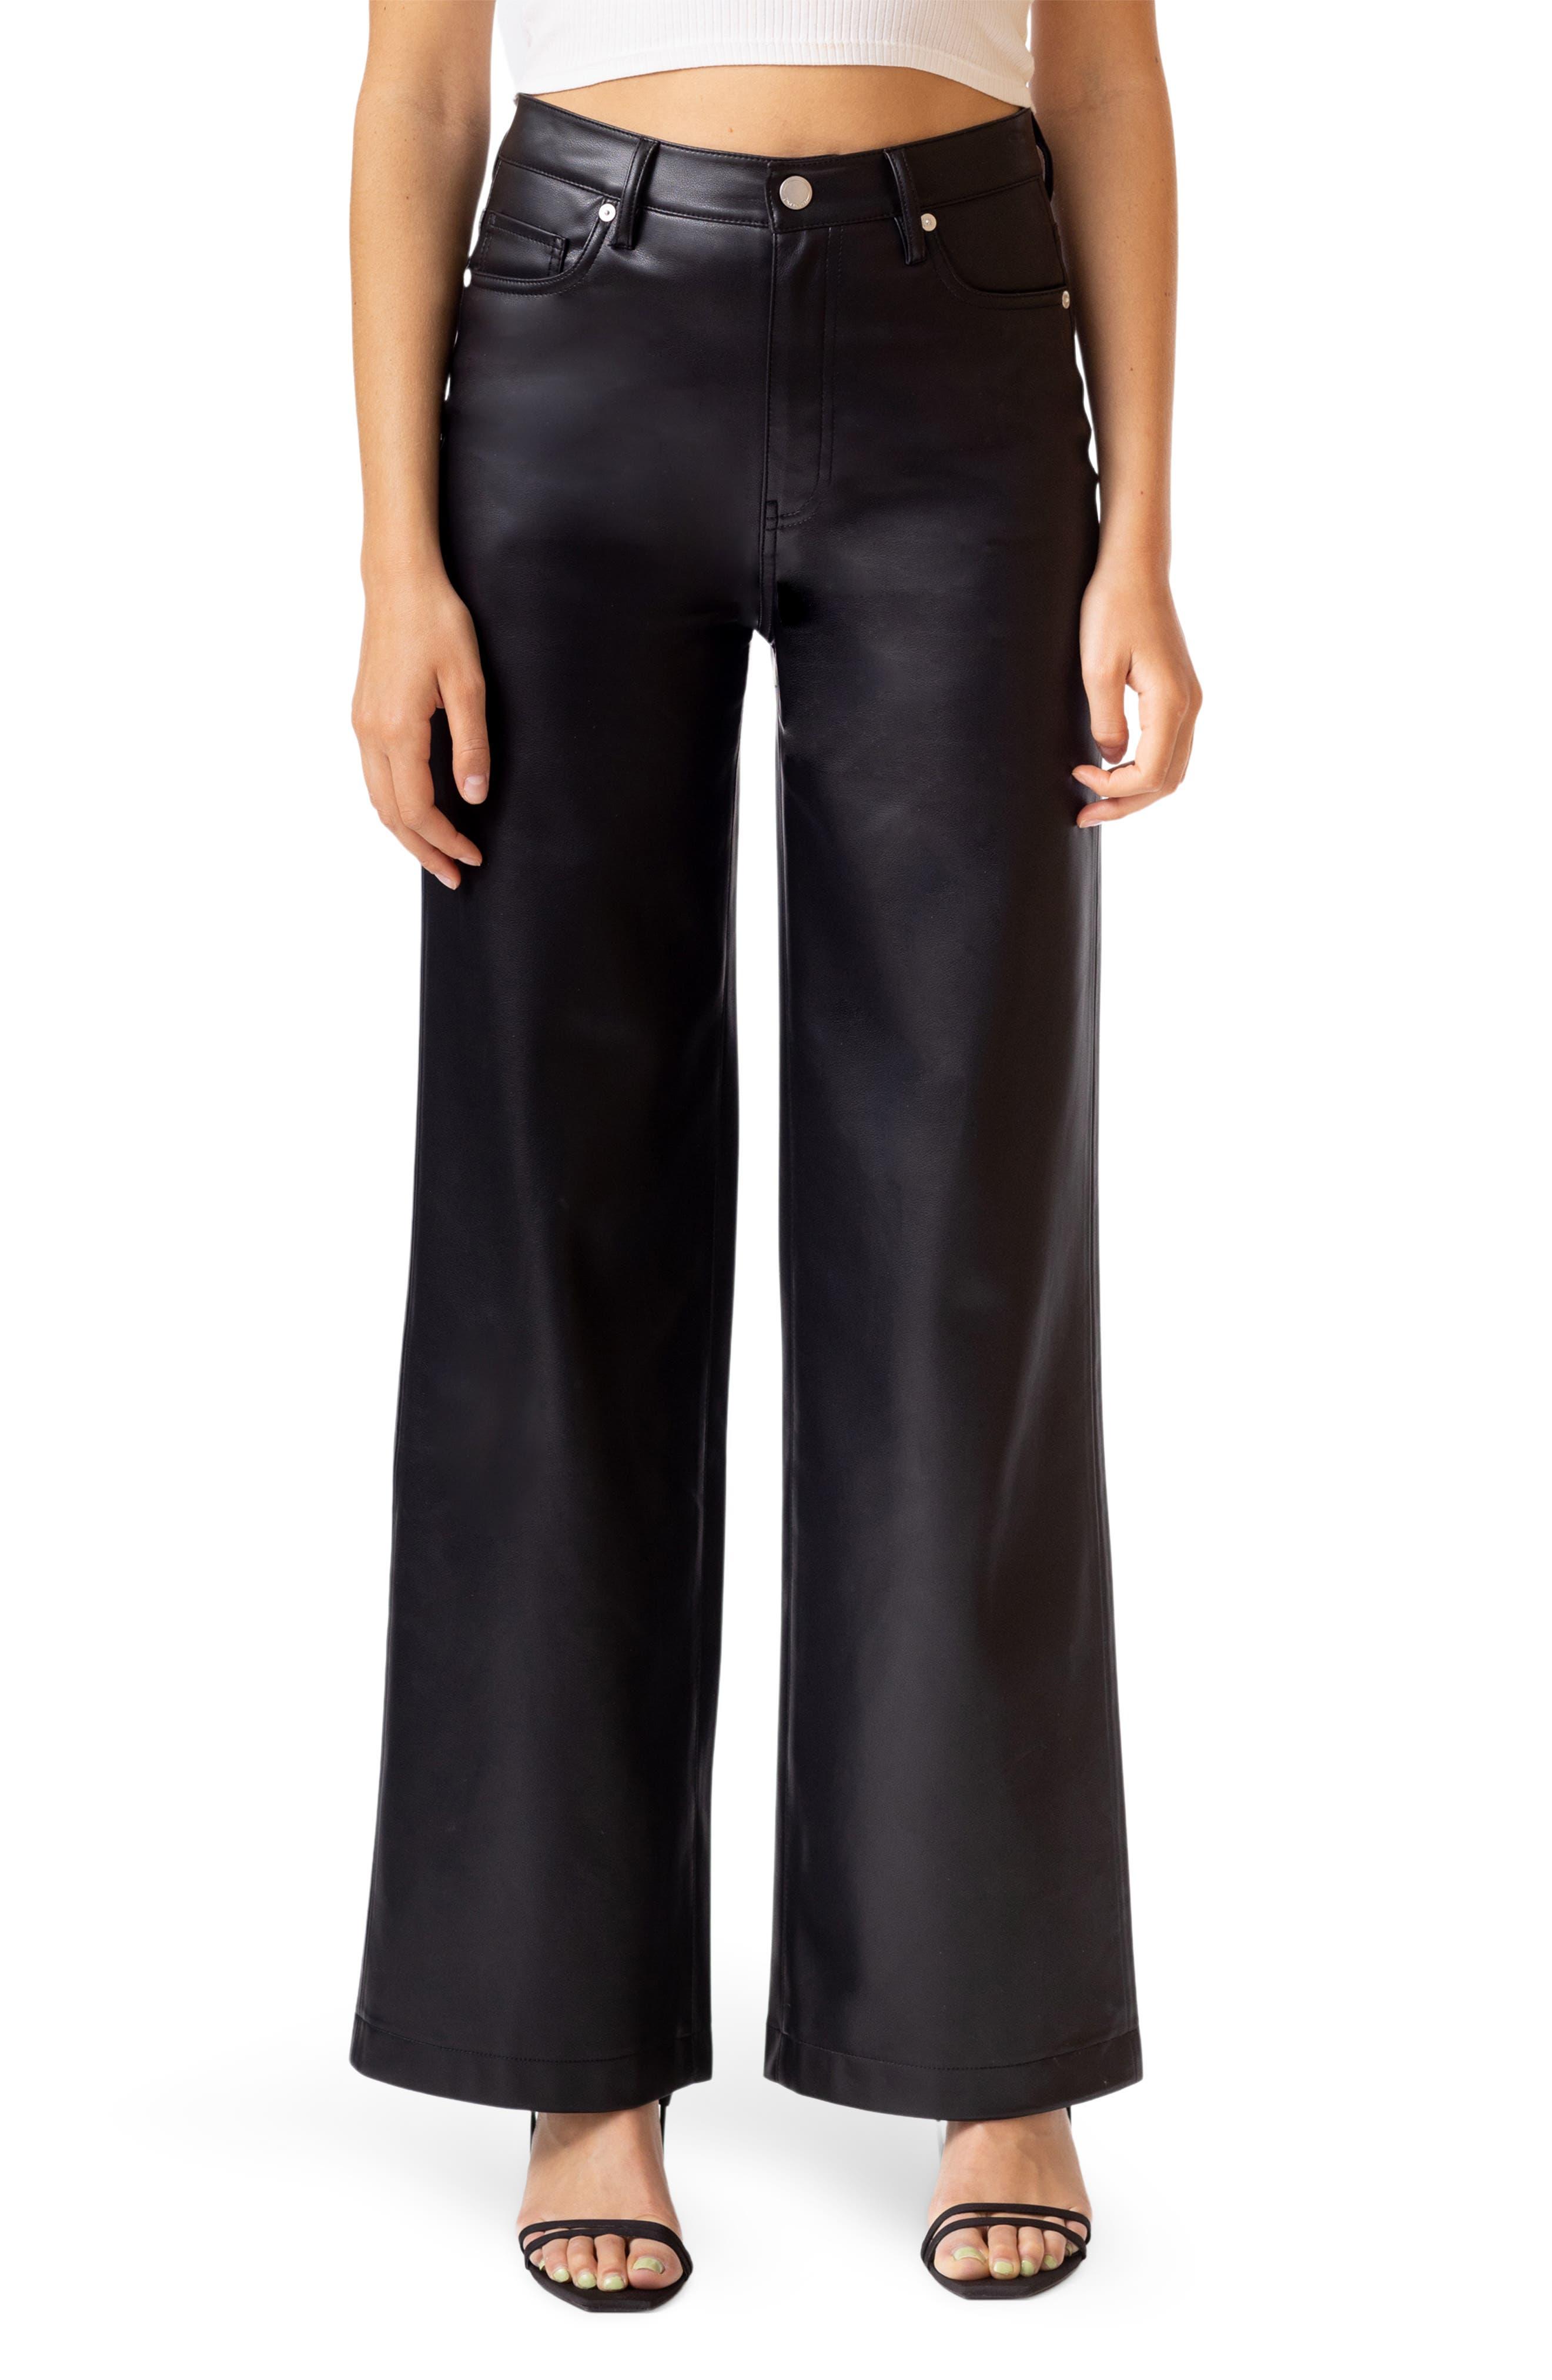 Blank NYC Franklin High Waist Faux Leather Wide Leg Pants in Black | Lyst